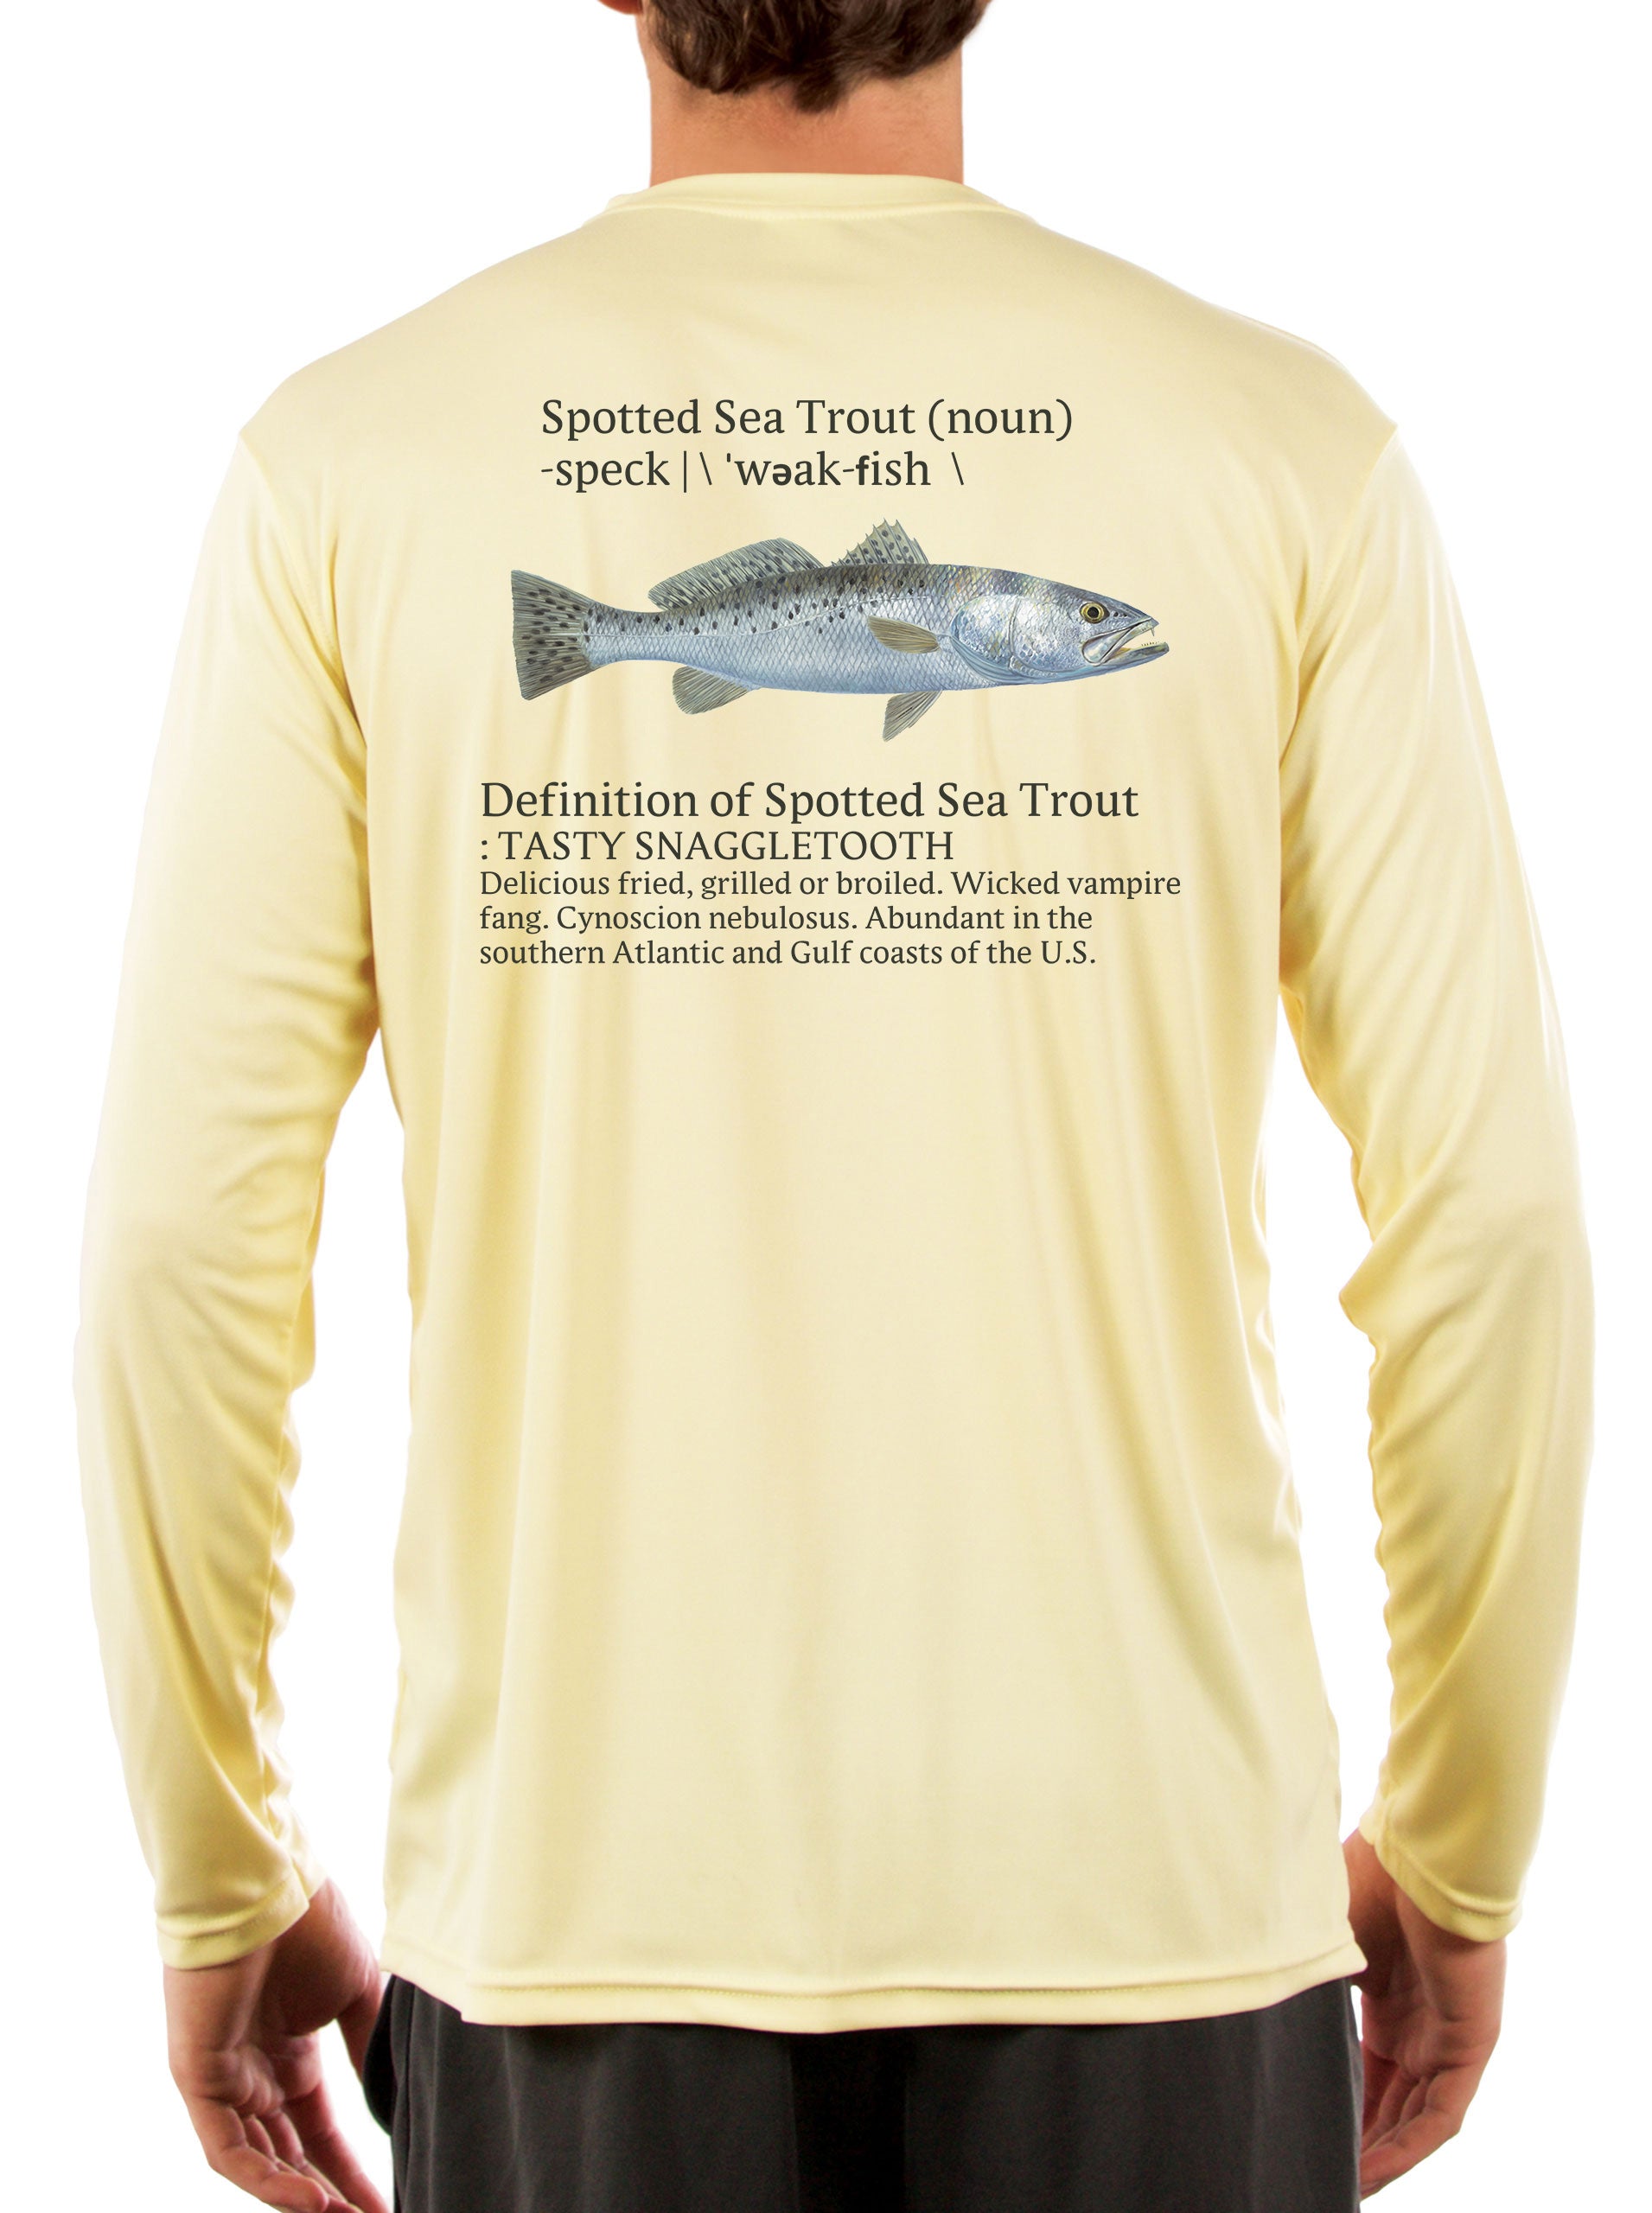 Speckled Trout Fishing Shirts for Men Skiff Inshore - UV Protected +50 Sun Protection with Moisture Wicking Technology Large / Pearl Gray